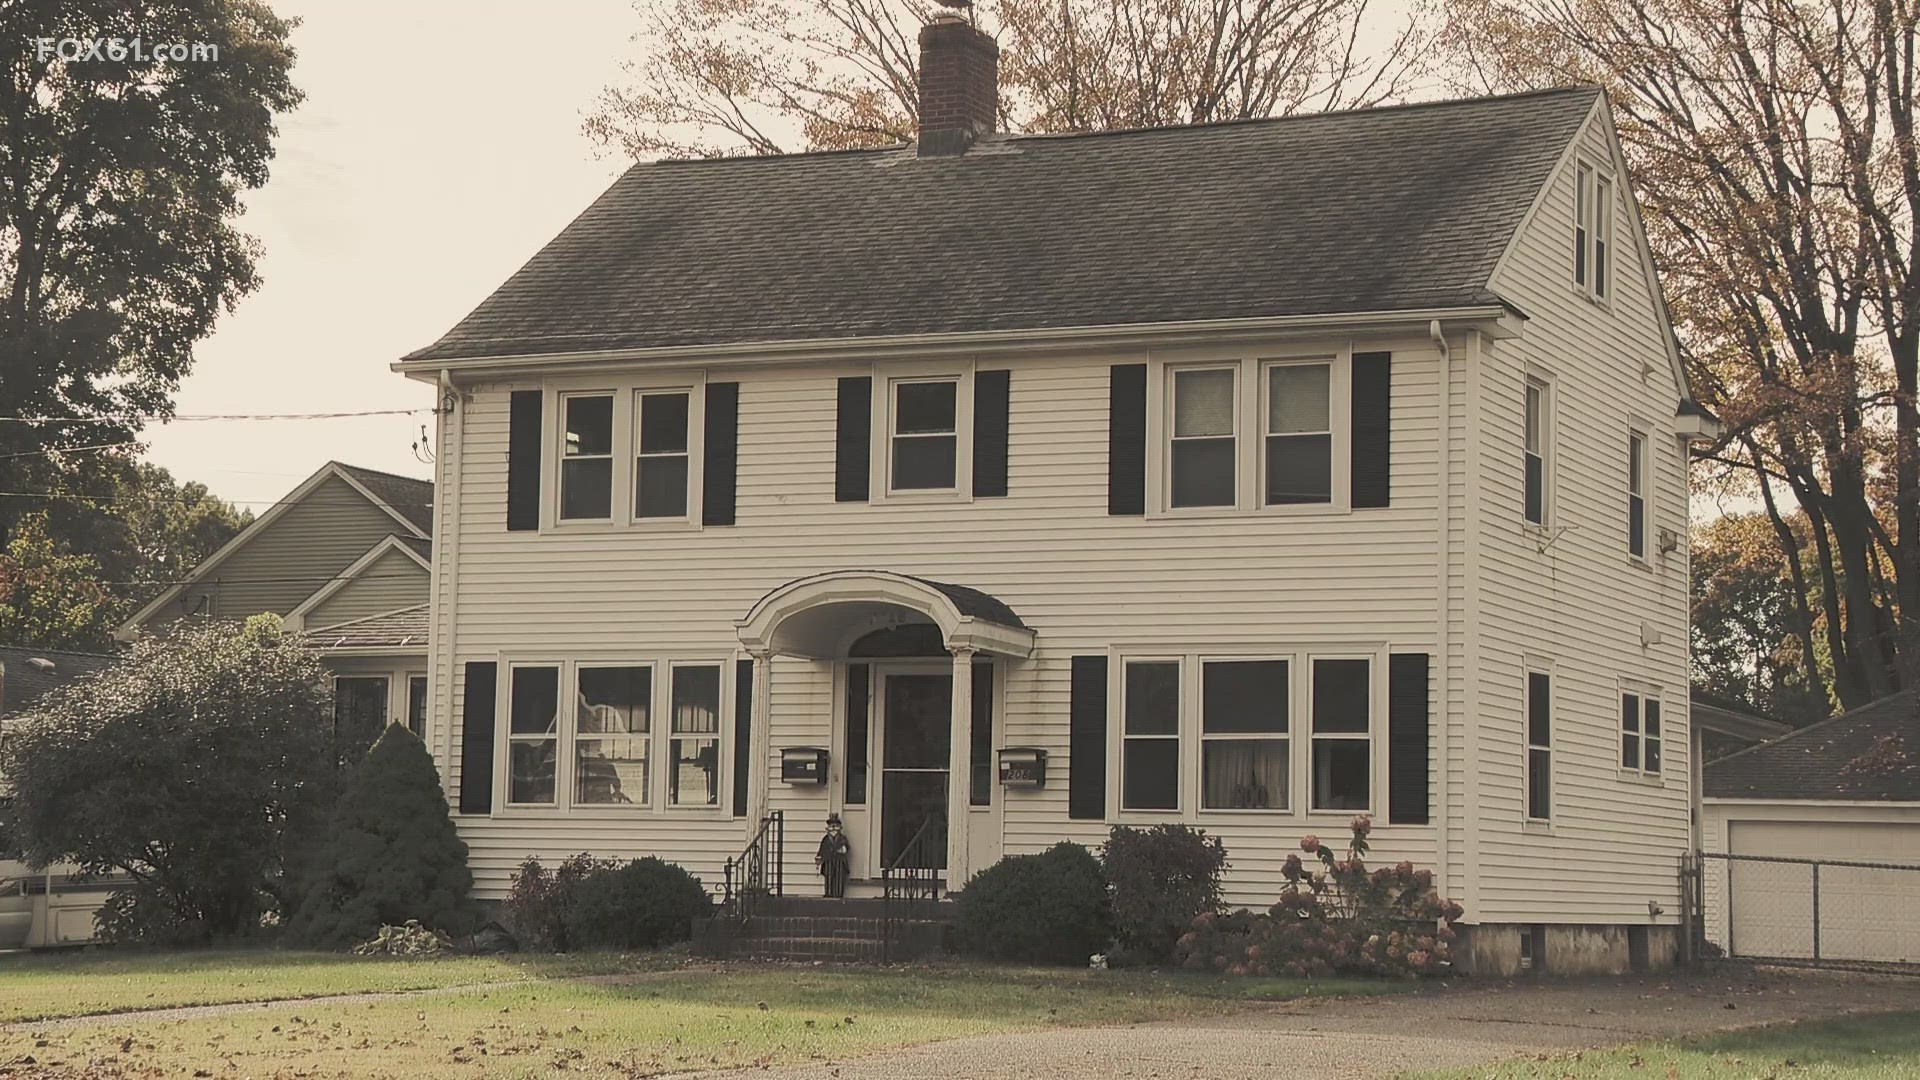 The 2009 movie "A Haunting in Connecticut" was based on the experiences inside this Sopithington home, and the owner's experiences live up to the stories.